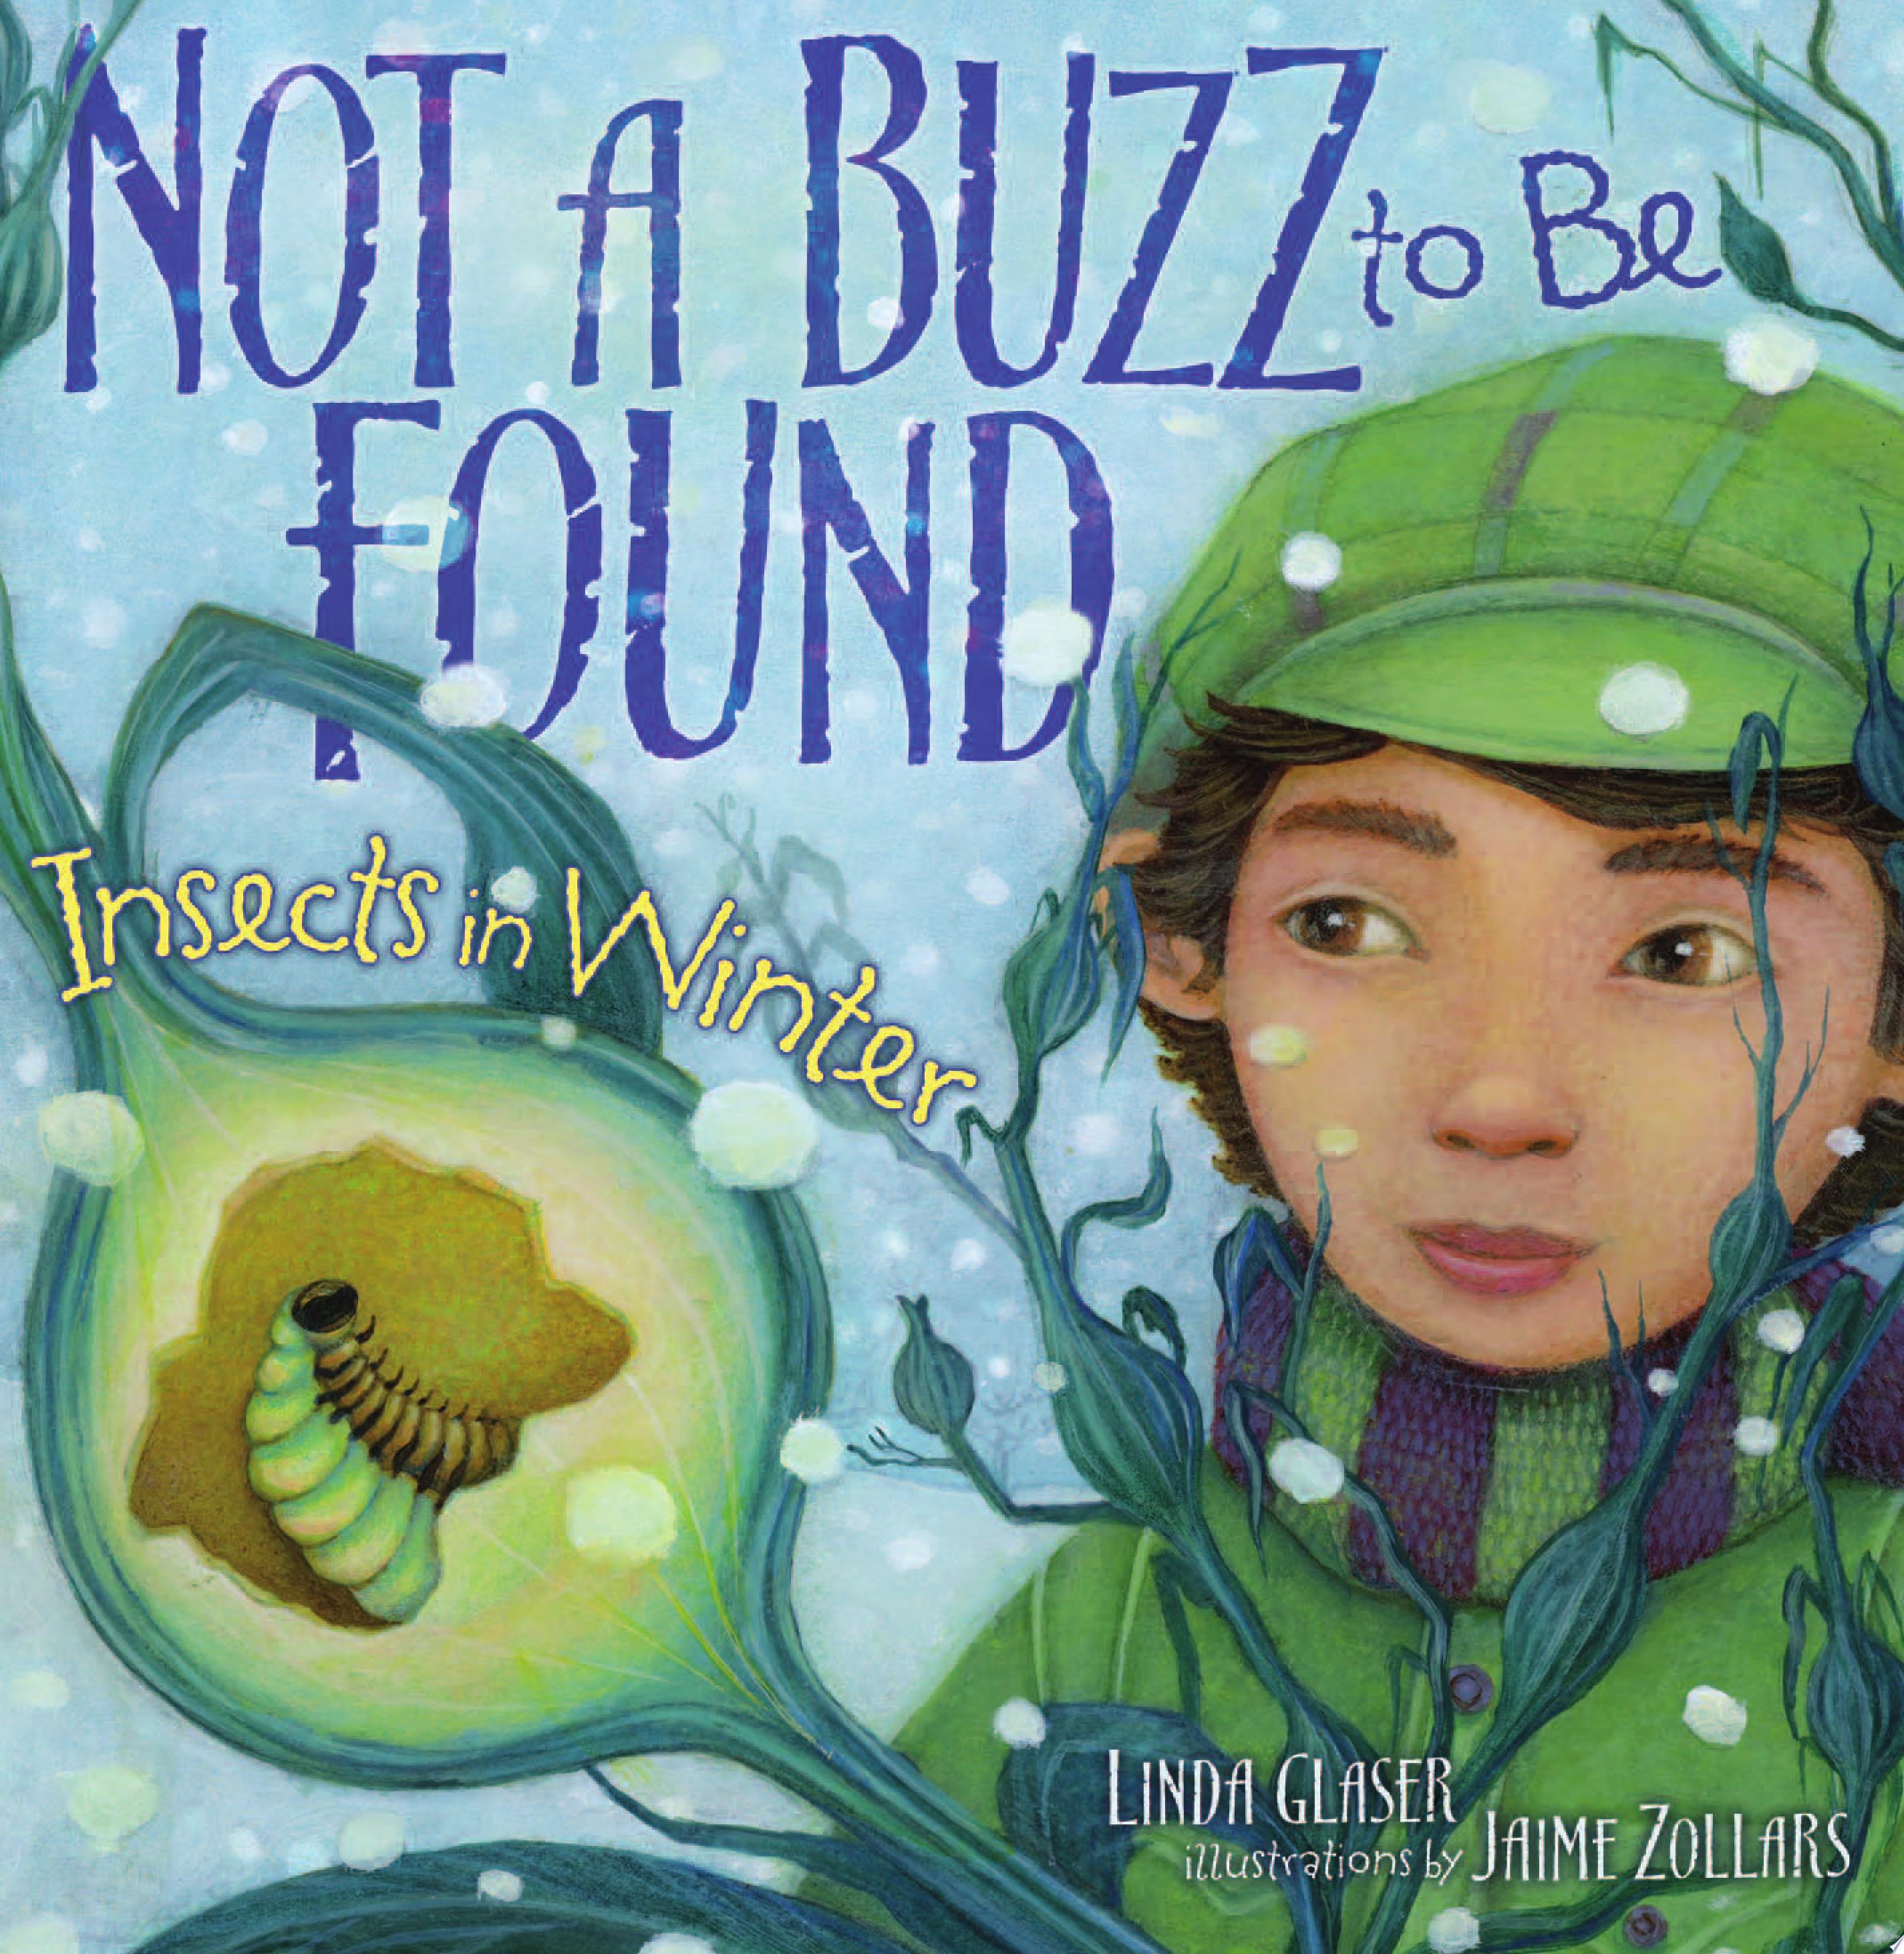 Image for "Not a Buzz to Be Found"